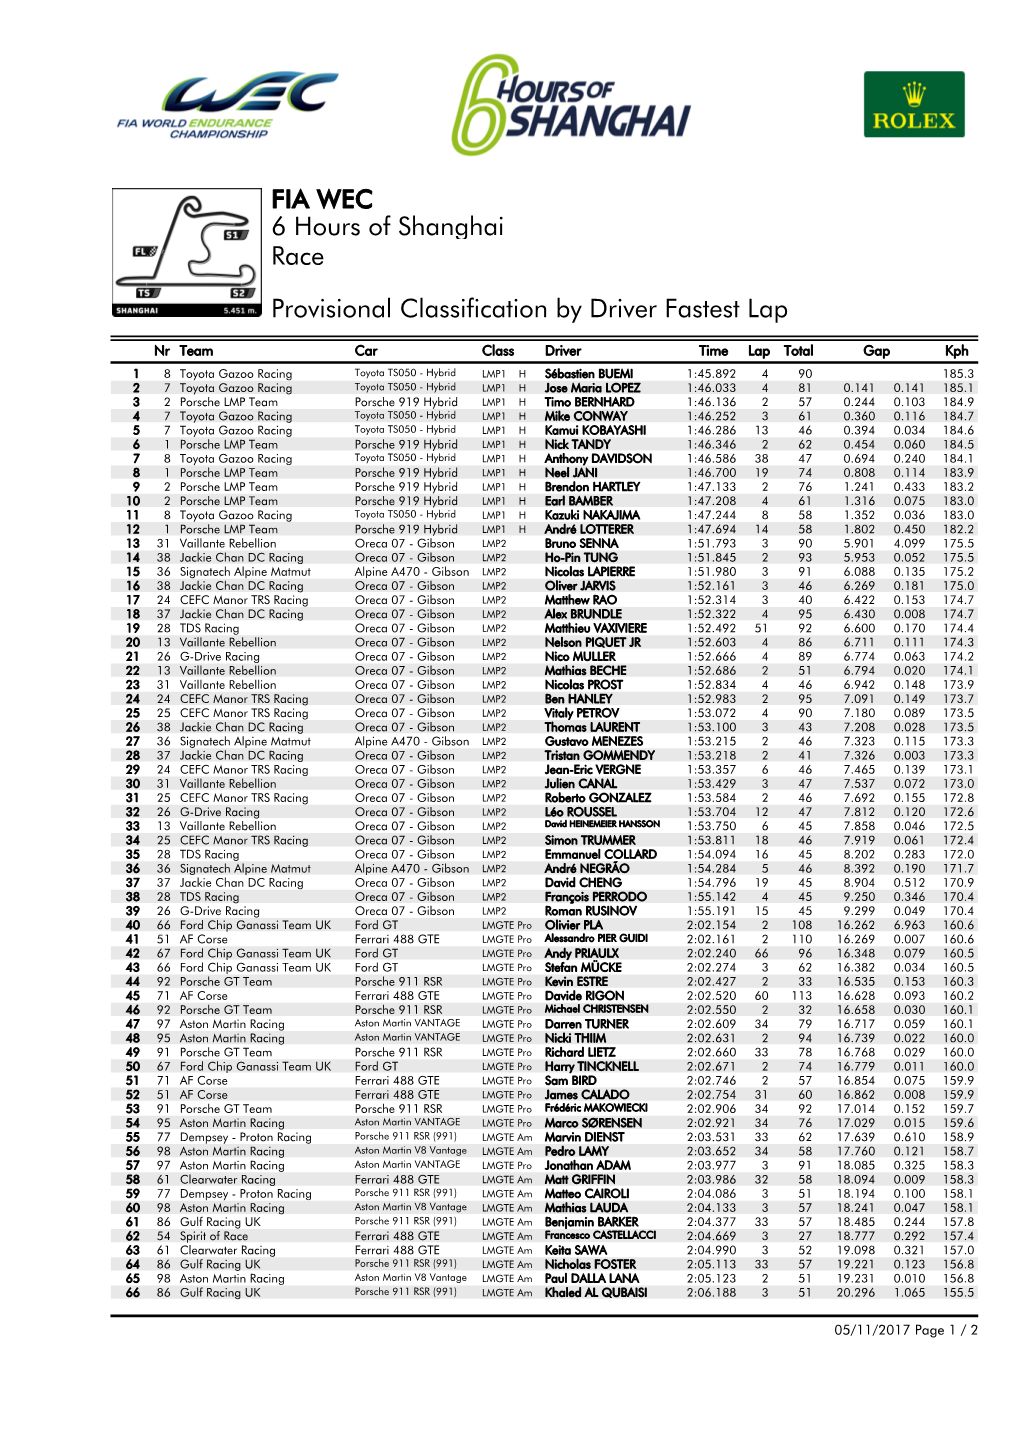 Provisional Classification by Driver Fastest Lap Race 6 Hours of Shanghai FIA